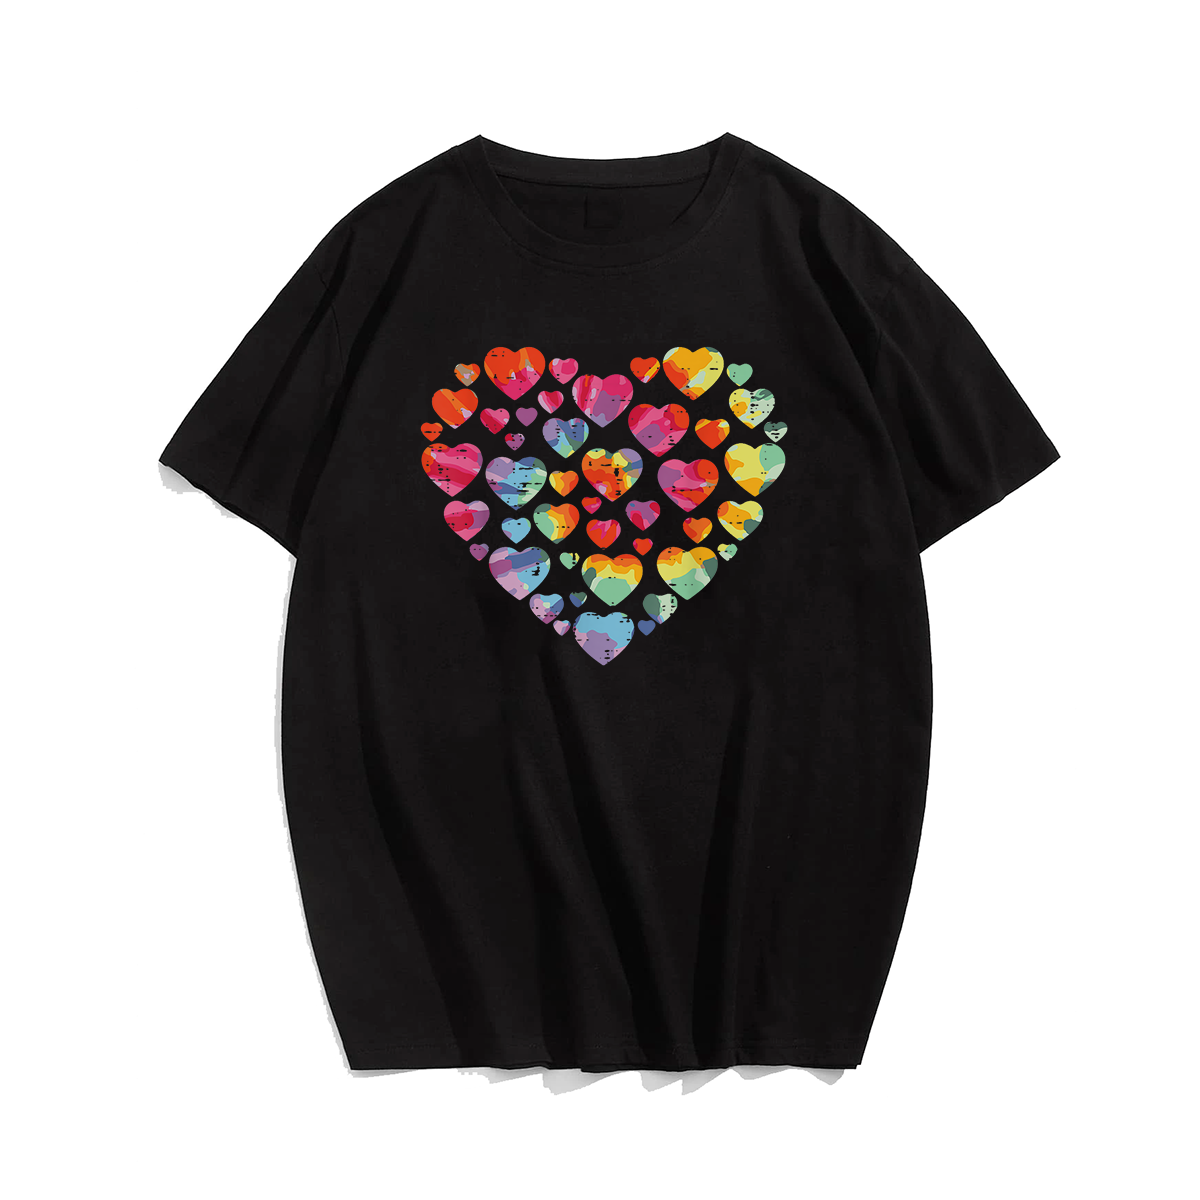 Valentines Day Heart Hearts T-Shirt, Men Plus Size Oversize T-shirt for Big & Tall Man